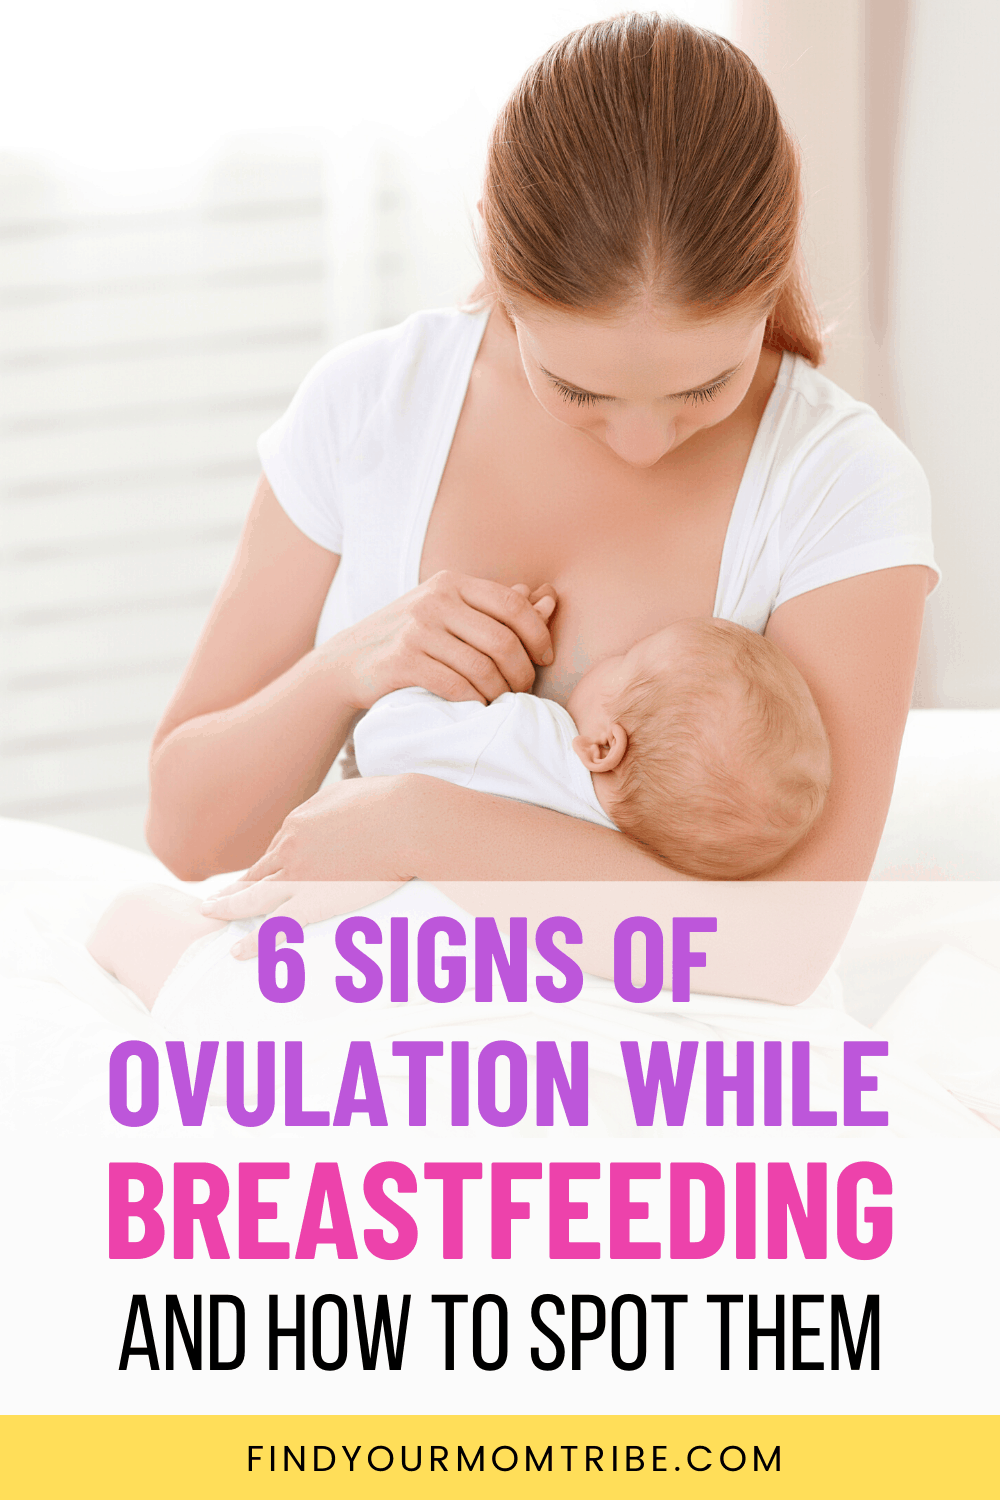 Pinterest signs of ovulation while breastfeeding